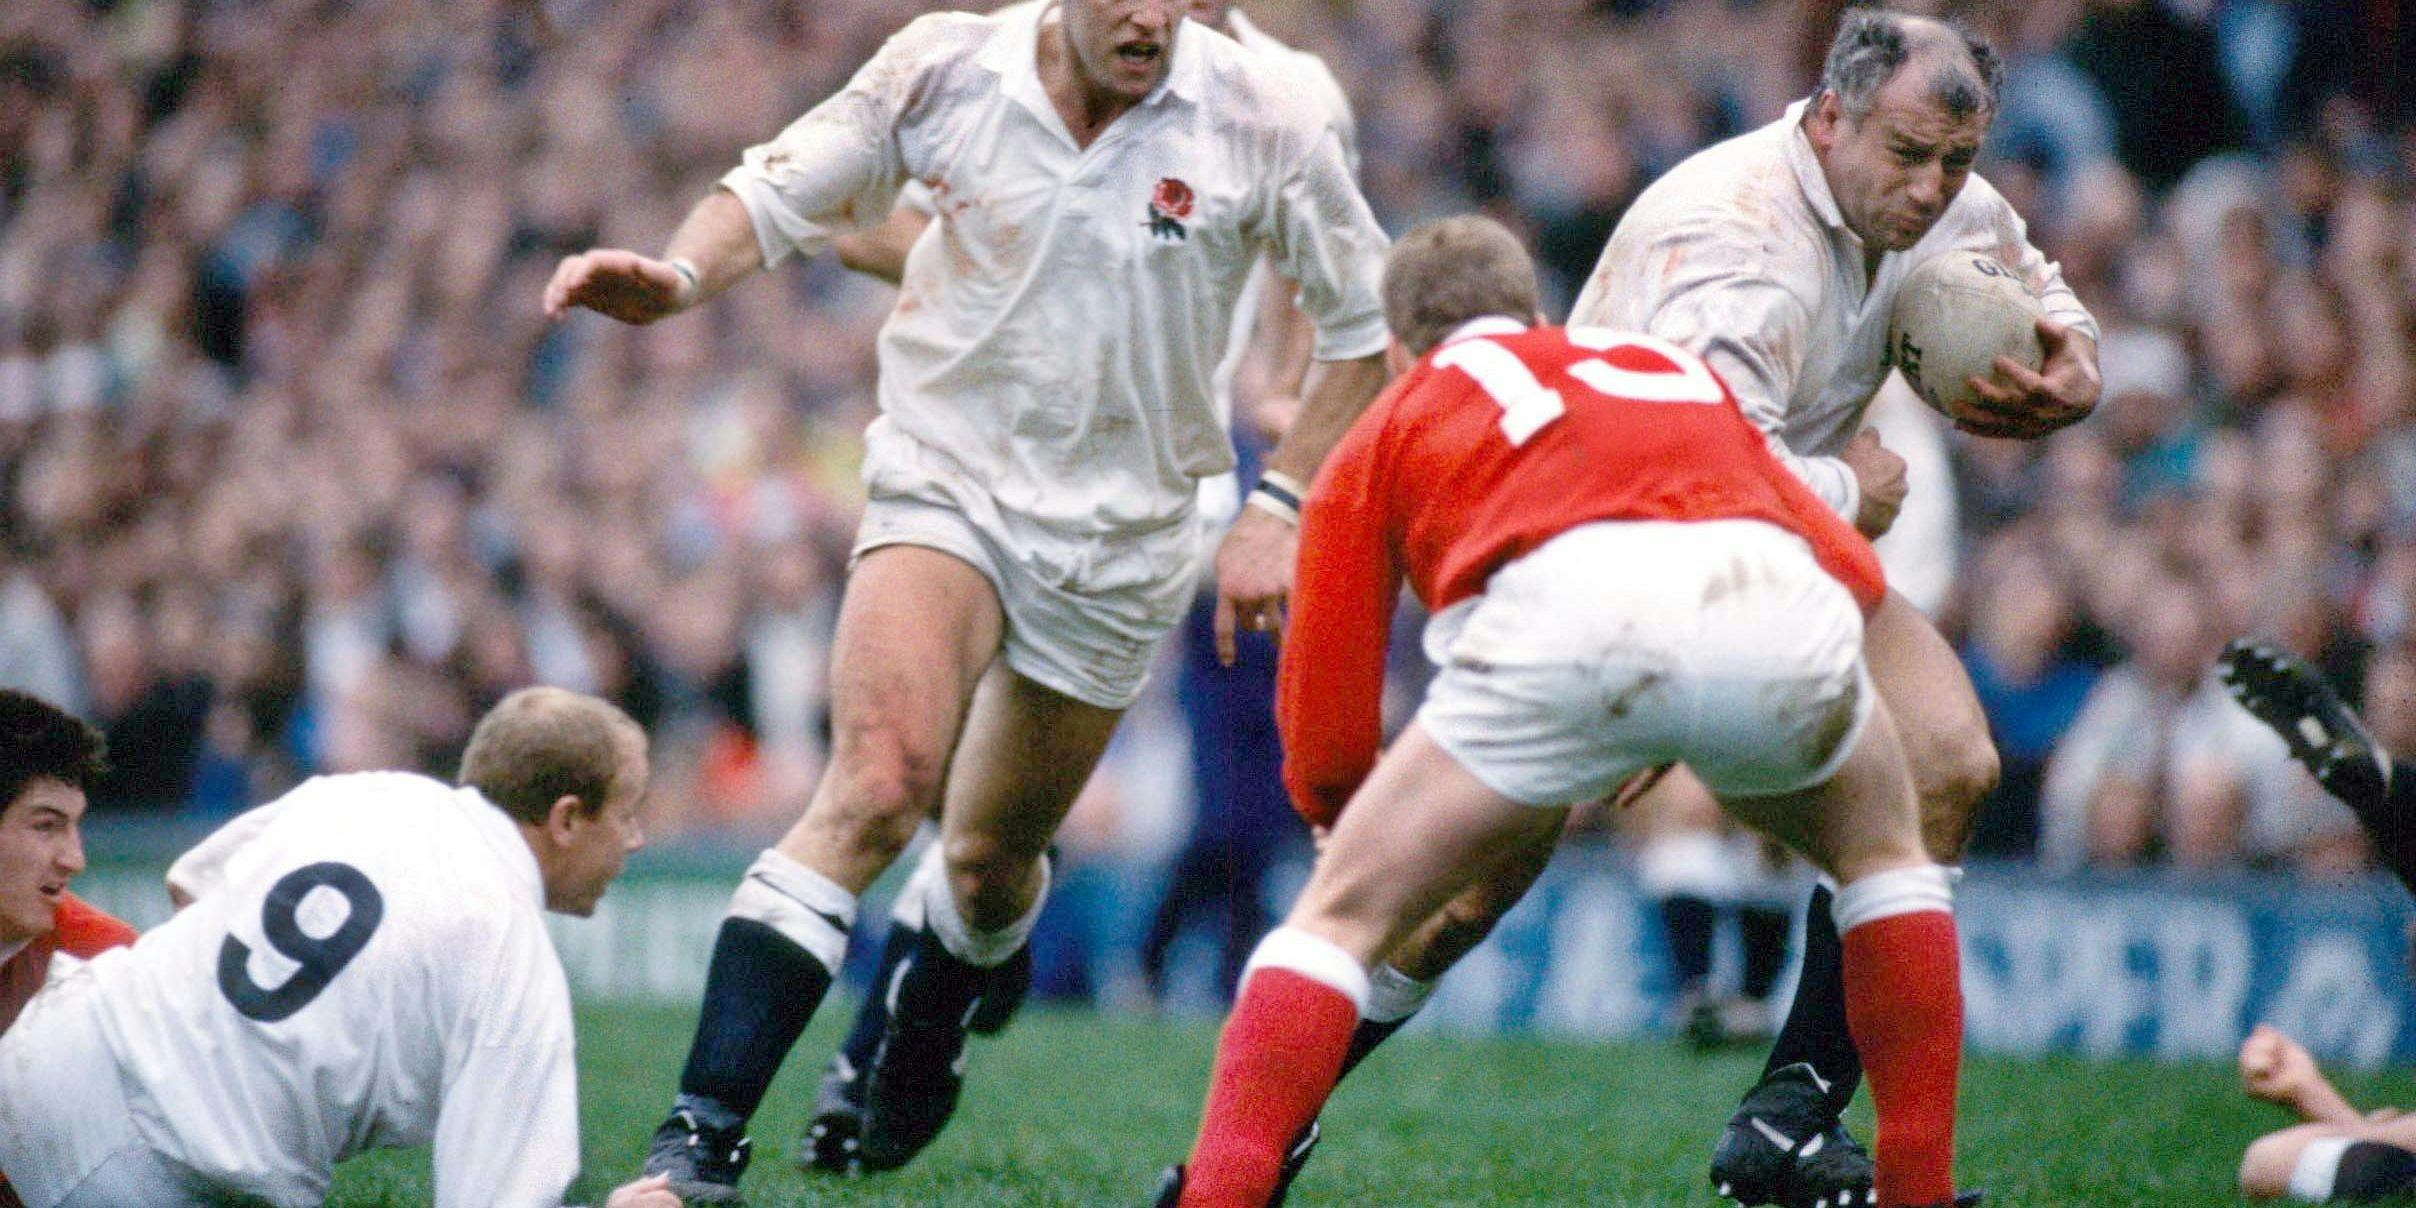 Paul Rendall playing for England v Wales